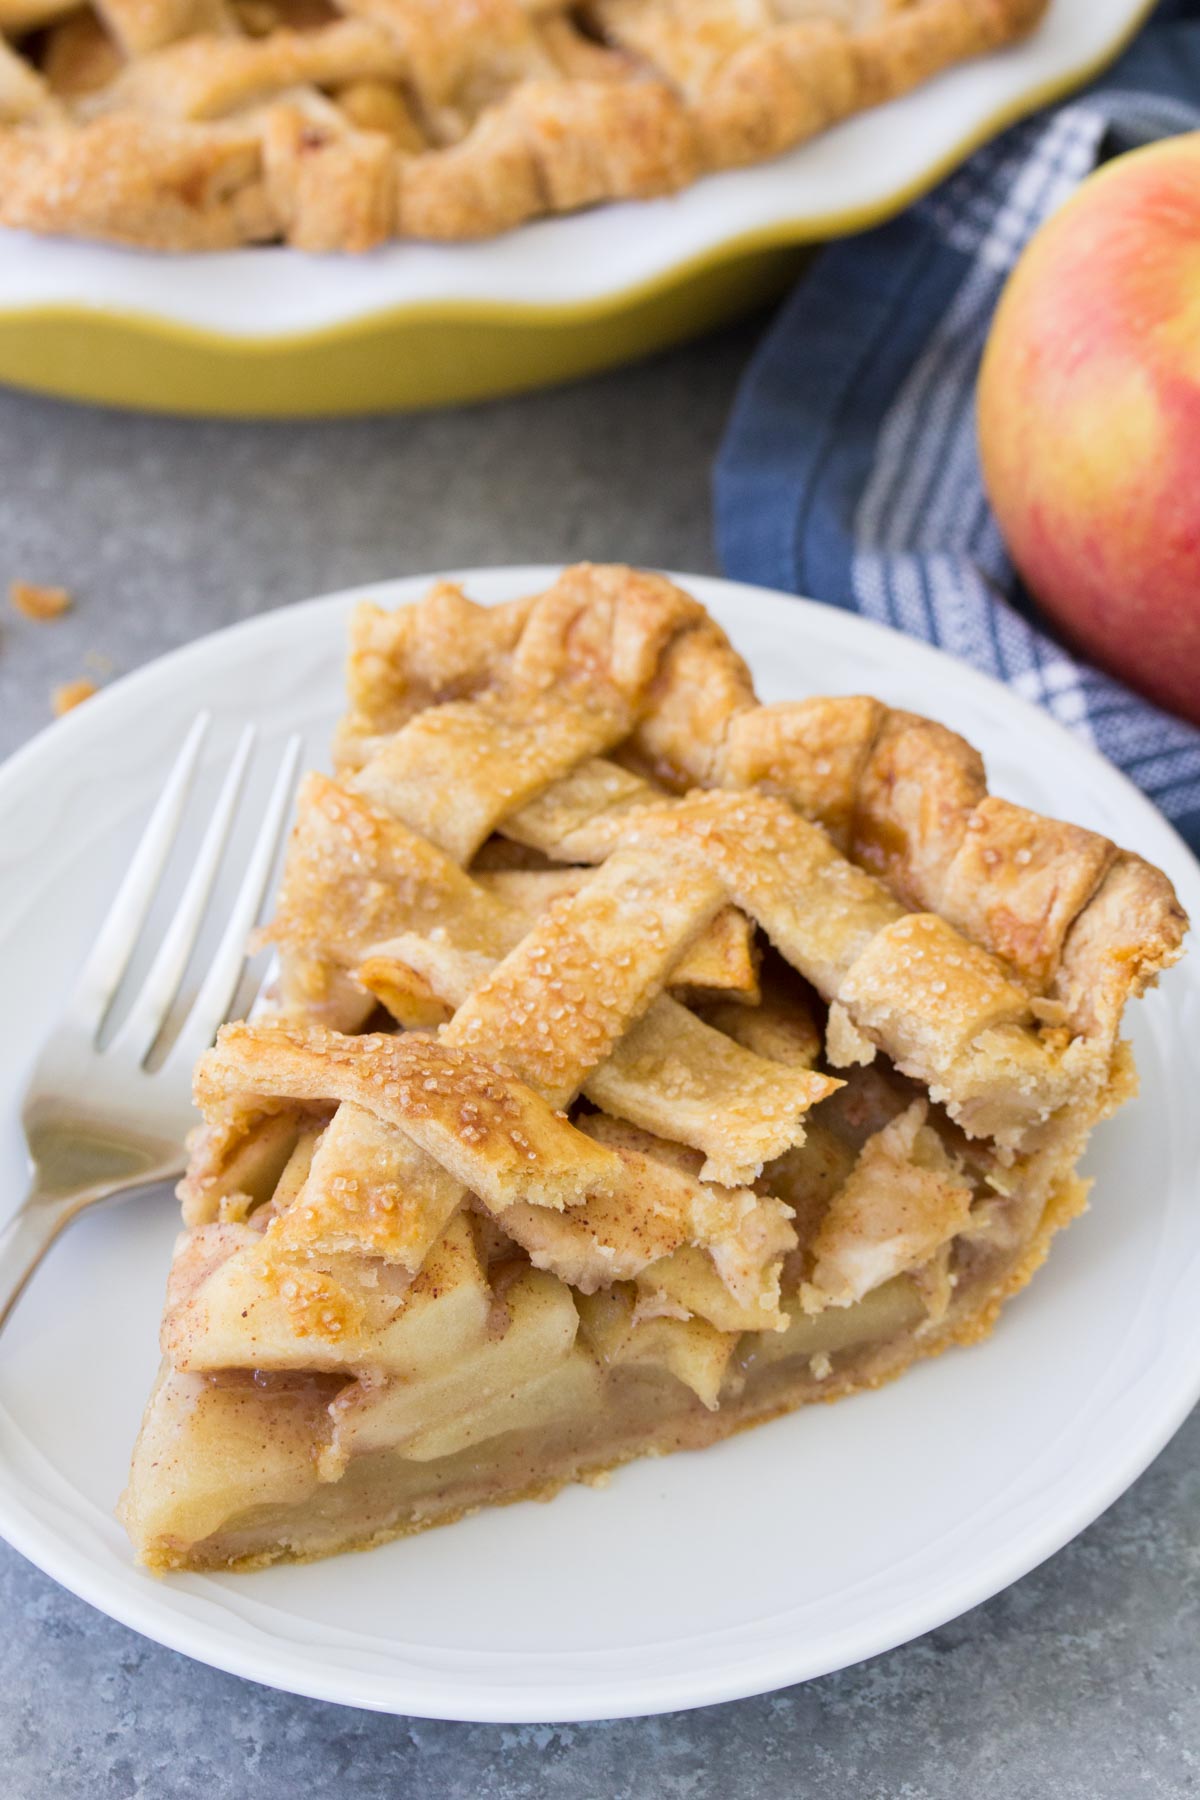 Slice of apple pie on a plate with a fork.